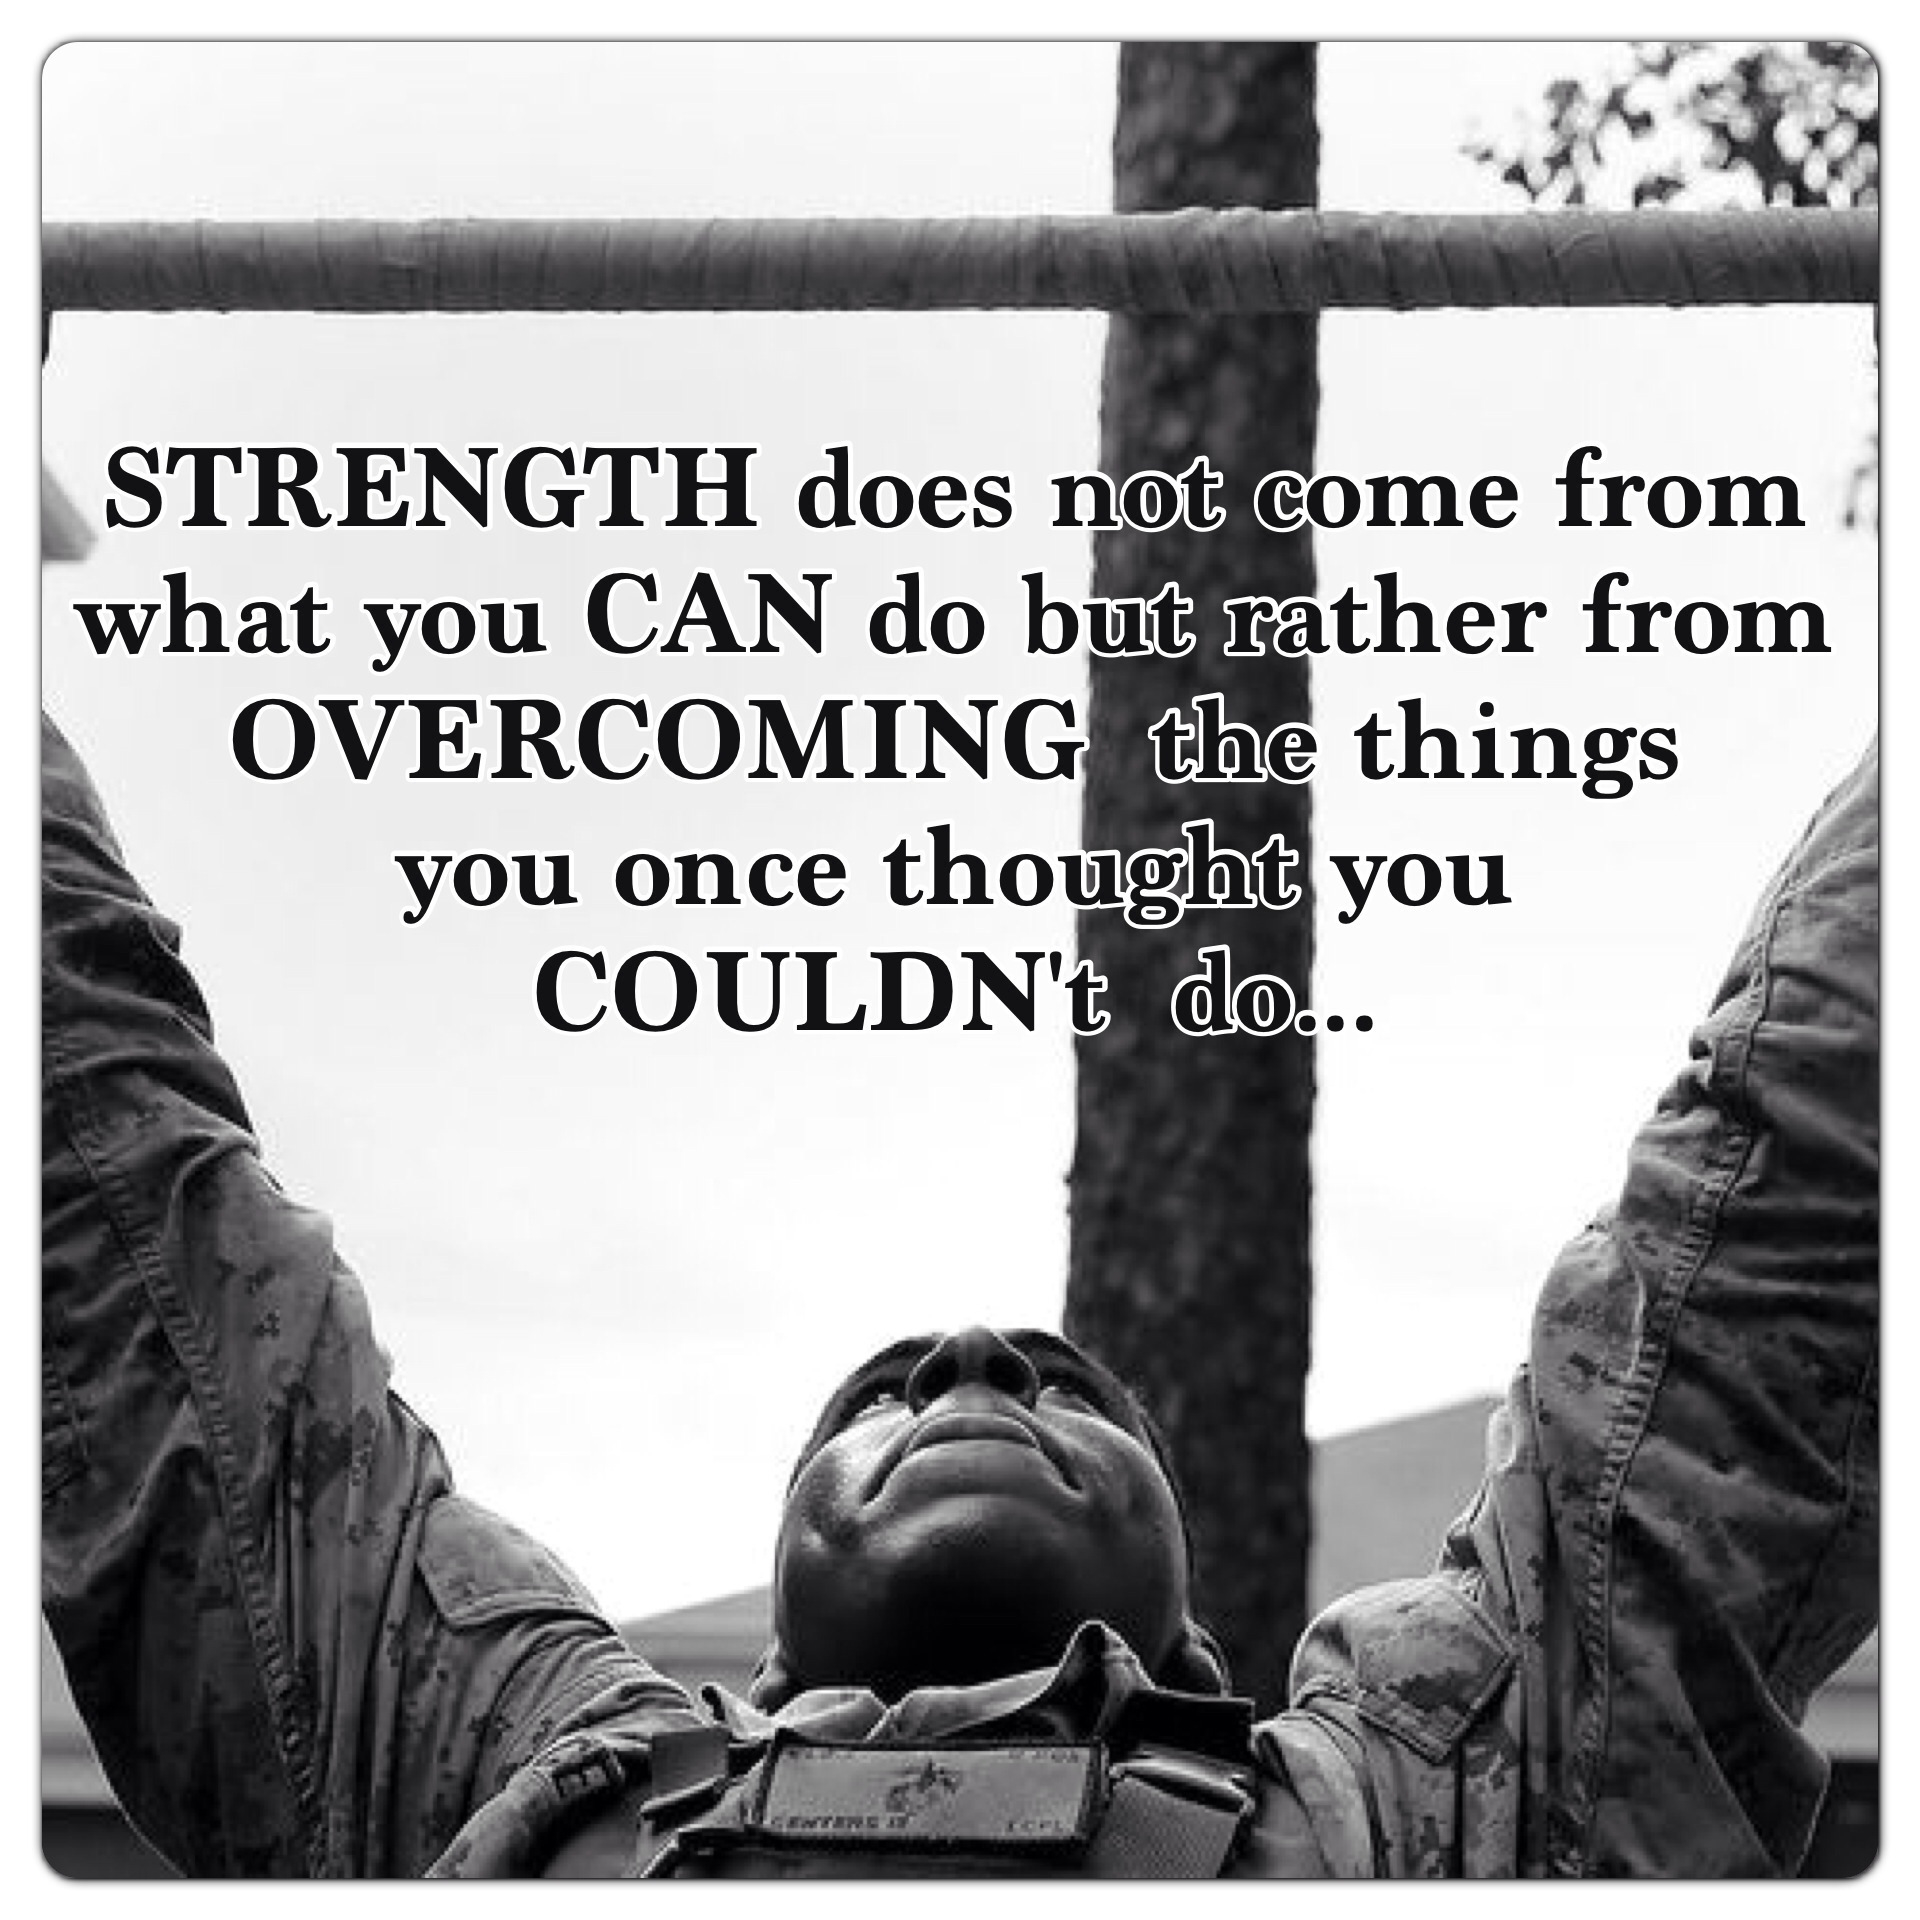 Awesome Marine Corps Quotes. QuotesGram